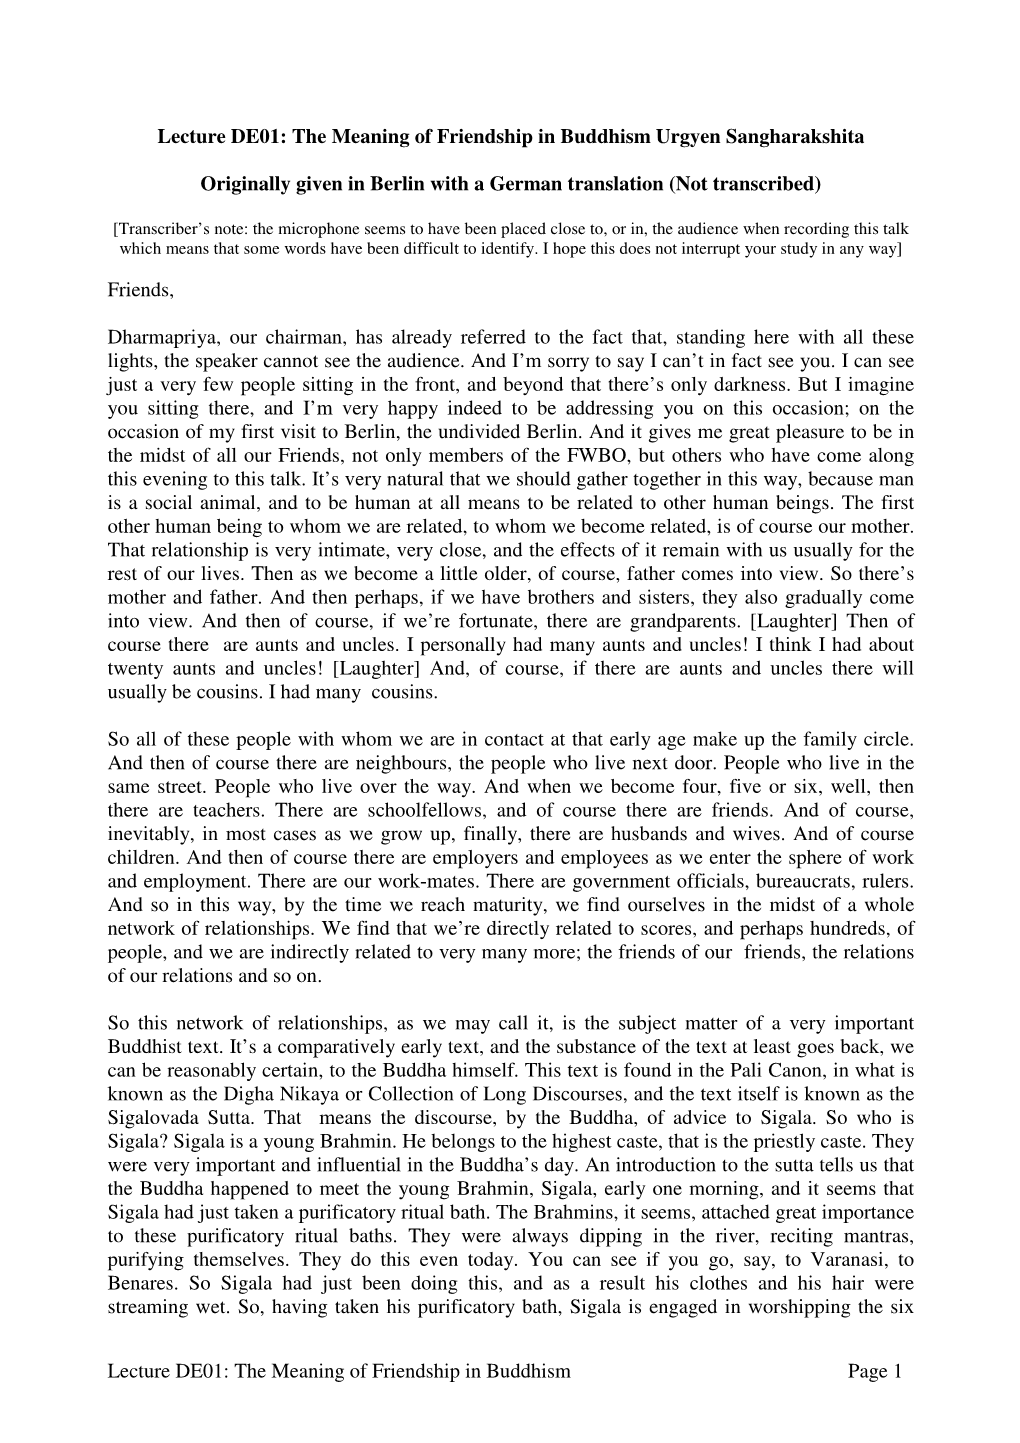 The Meaning of Friendship in Buddhism Page 1 Lecture DE01